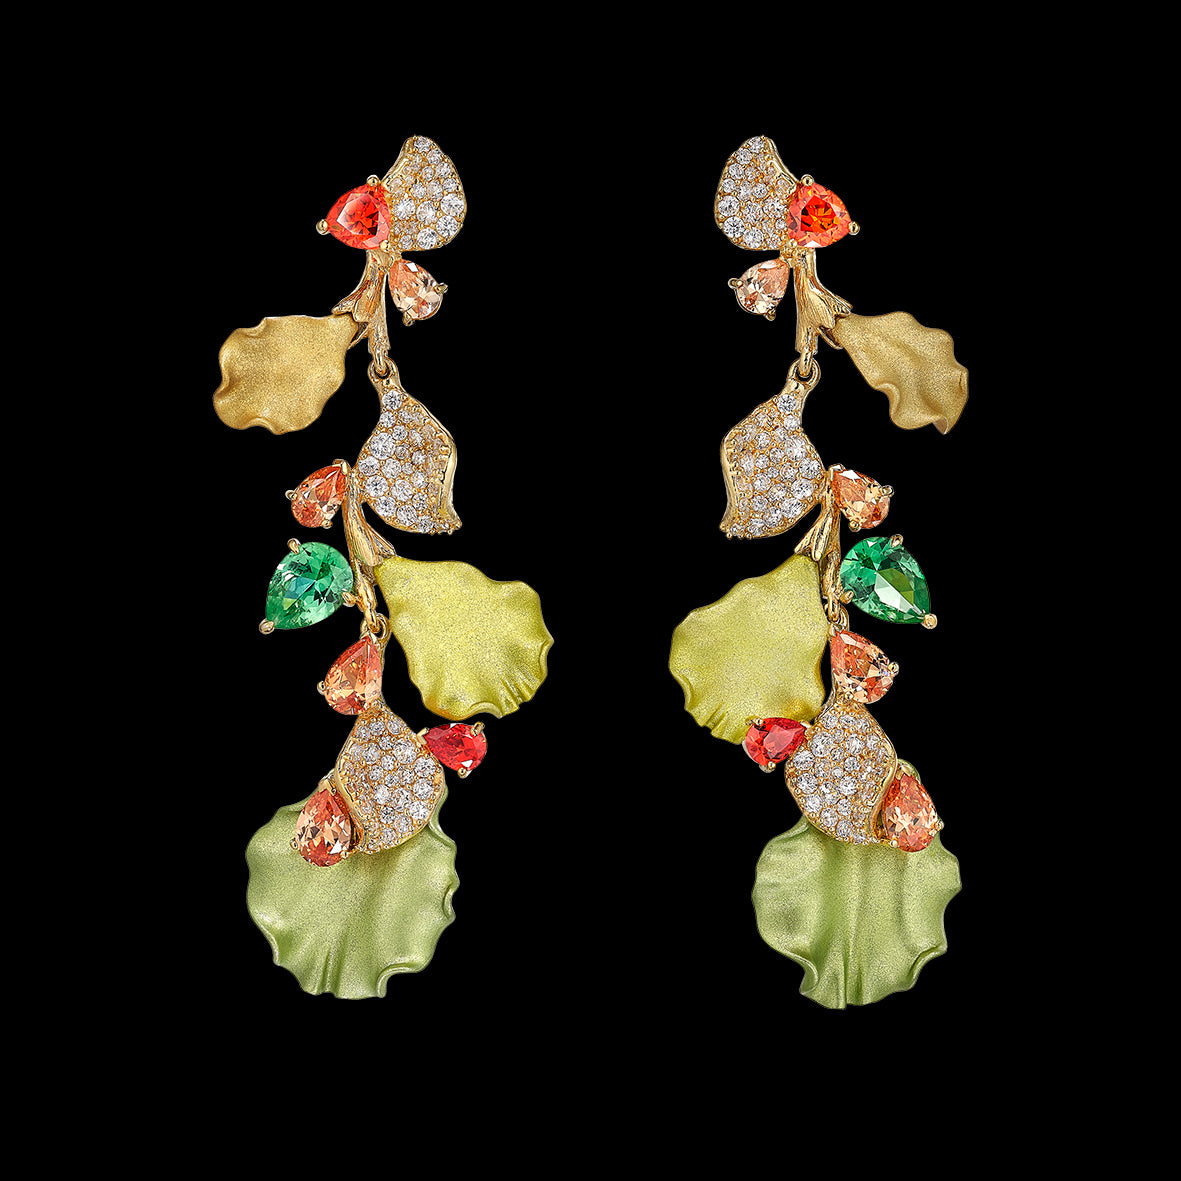 Citrus Thea Earrings, Earring, Anabela Chan Joaillerie - Fine jewelry with laboratory grown and created gemstones hand-crafted in the United Kingdom. Anabela Chan Joaillerie is the first fine jewellery brand in the world to champion laboratory-grown and created gemstones with high jewellery design, artisanal craftsmanship and a focus on ethical and sustainable innovations.